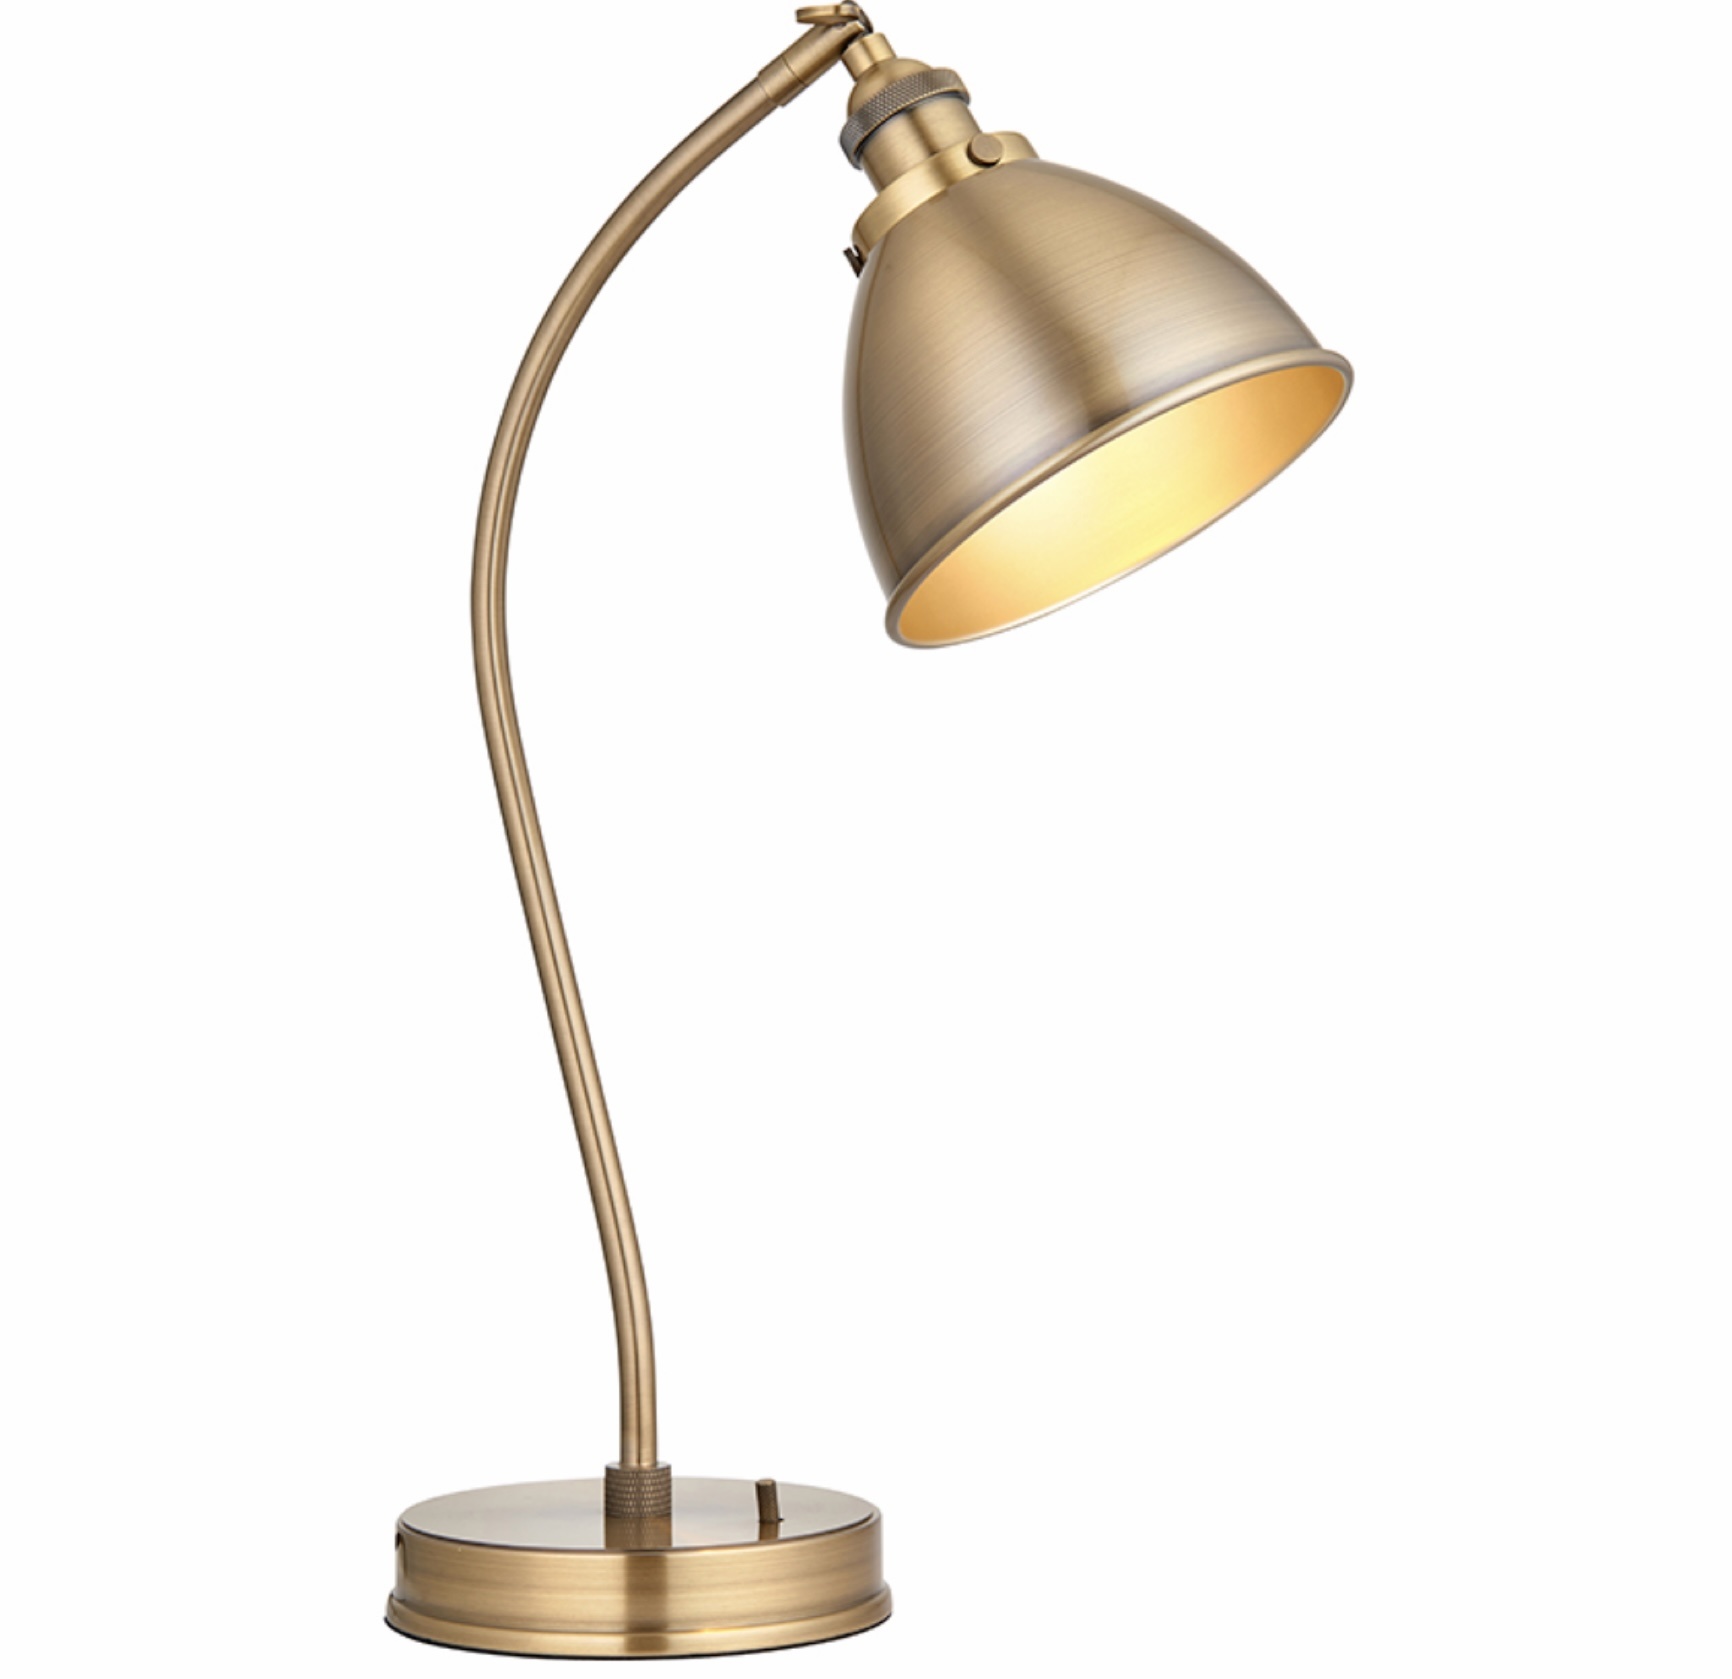 Cambridge Adjustable Desk Lamp in an Antique Brass Finish with